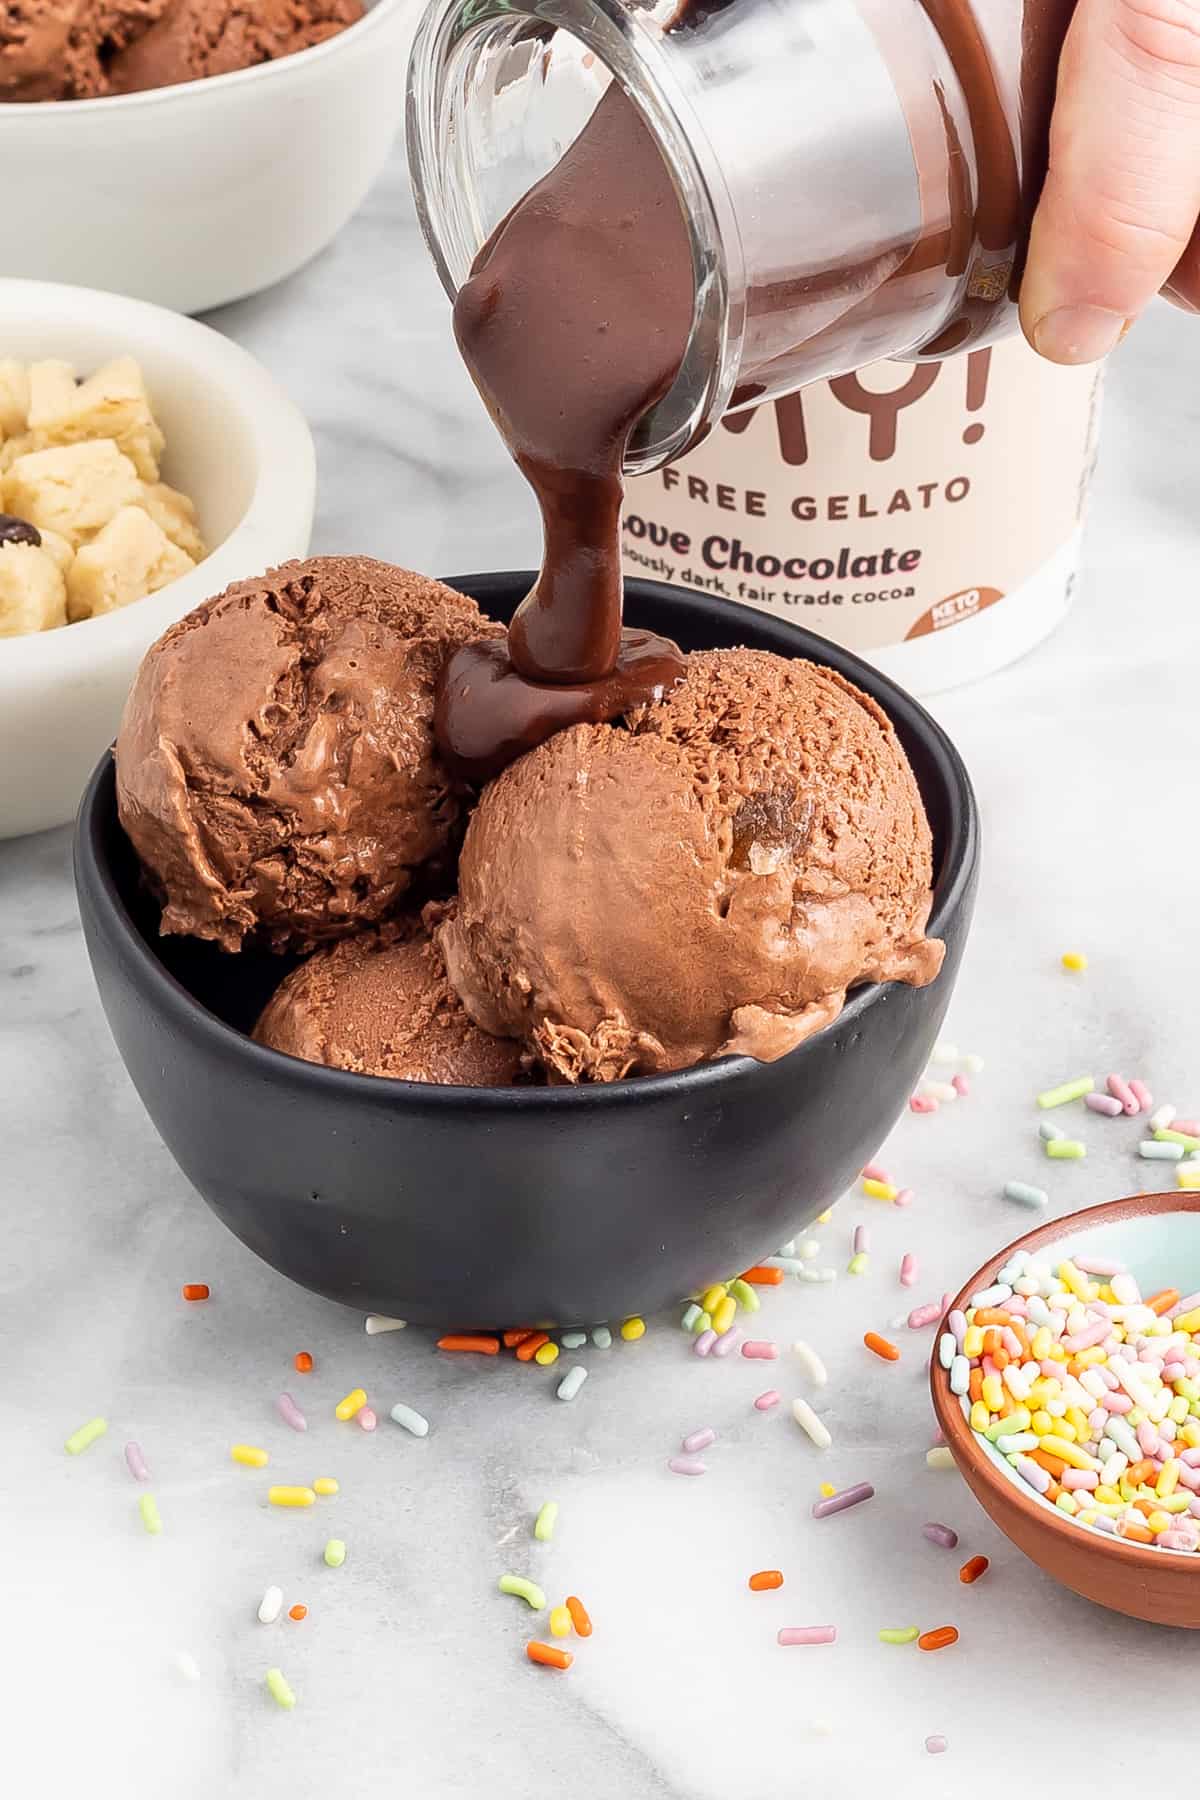 Keto Hot Fudge Sauce being poured over a bowl of chocolate gelato